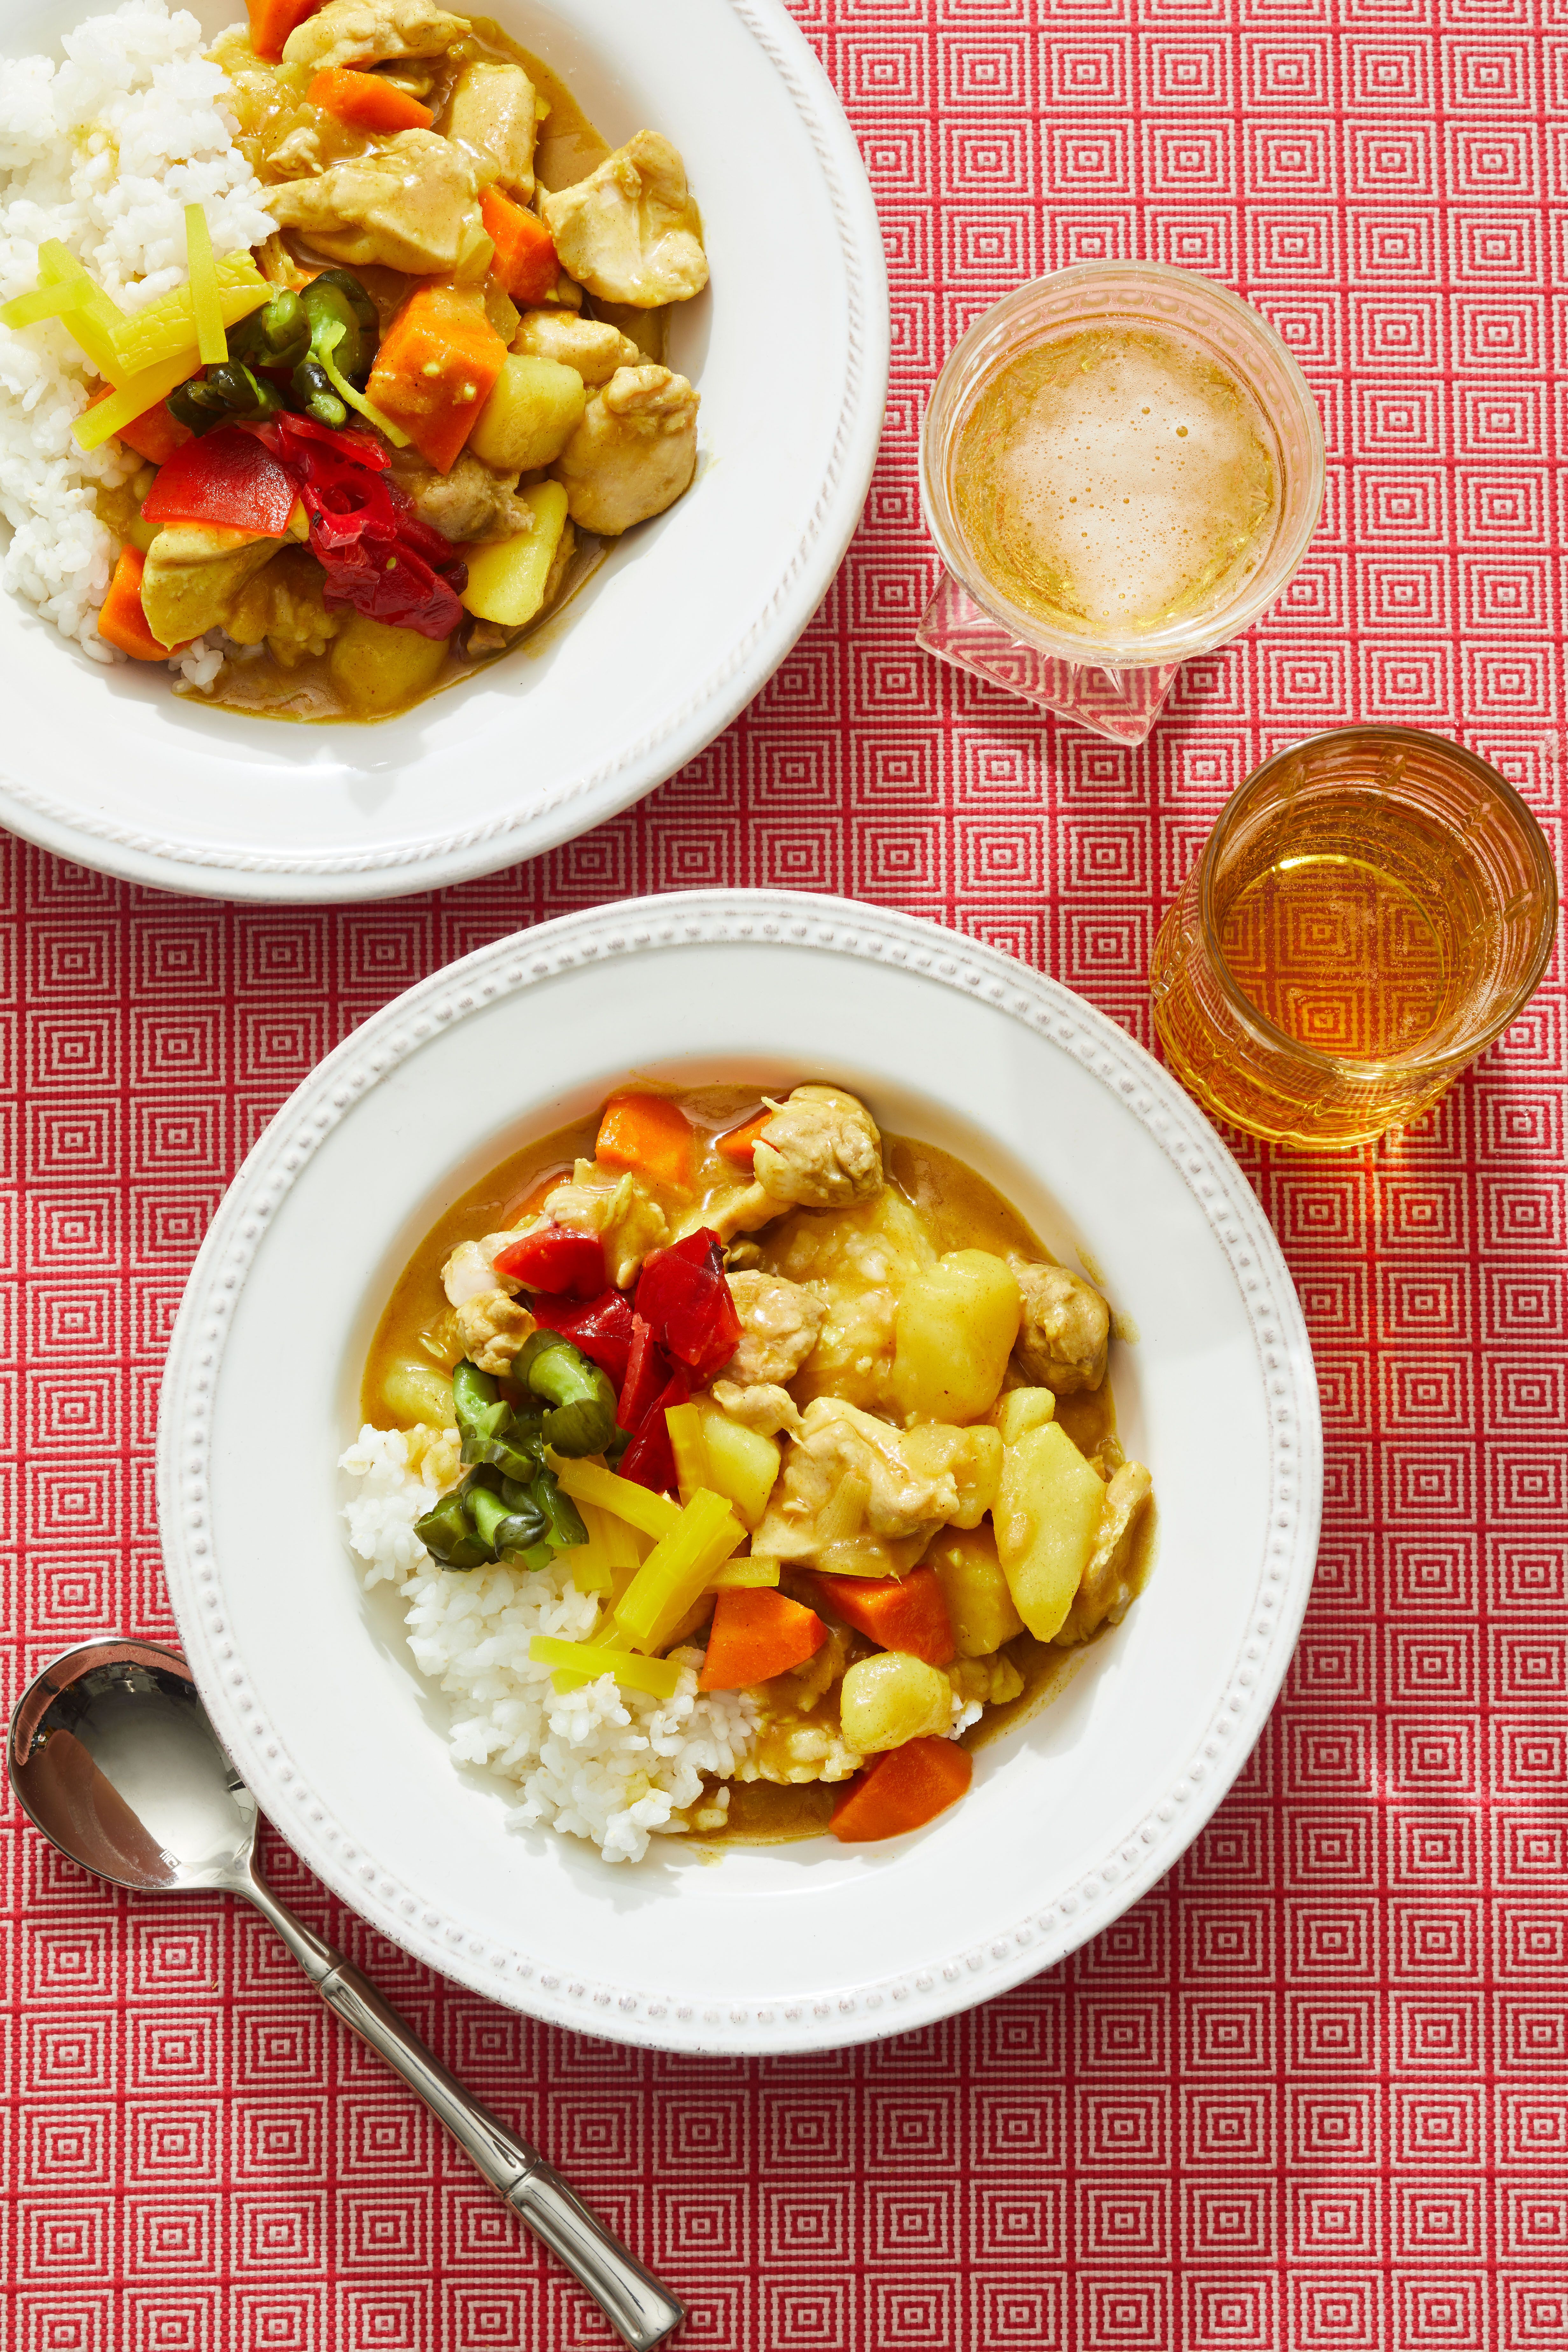 Japanese Mild Chicken Curry with S&B Golden Curry 